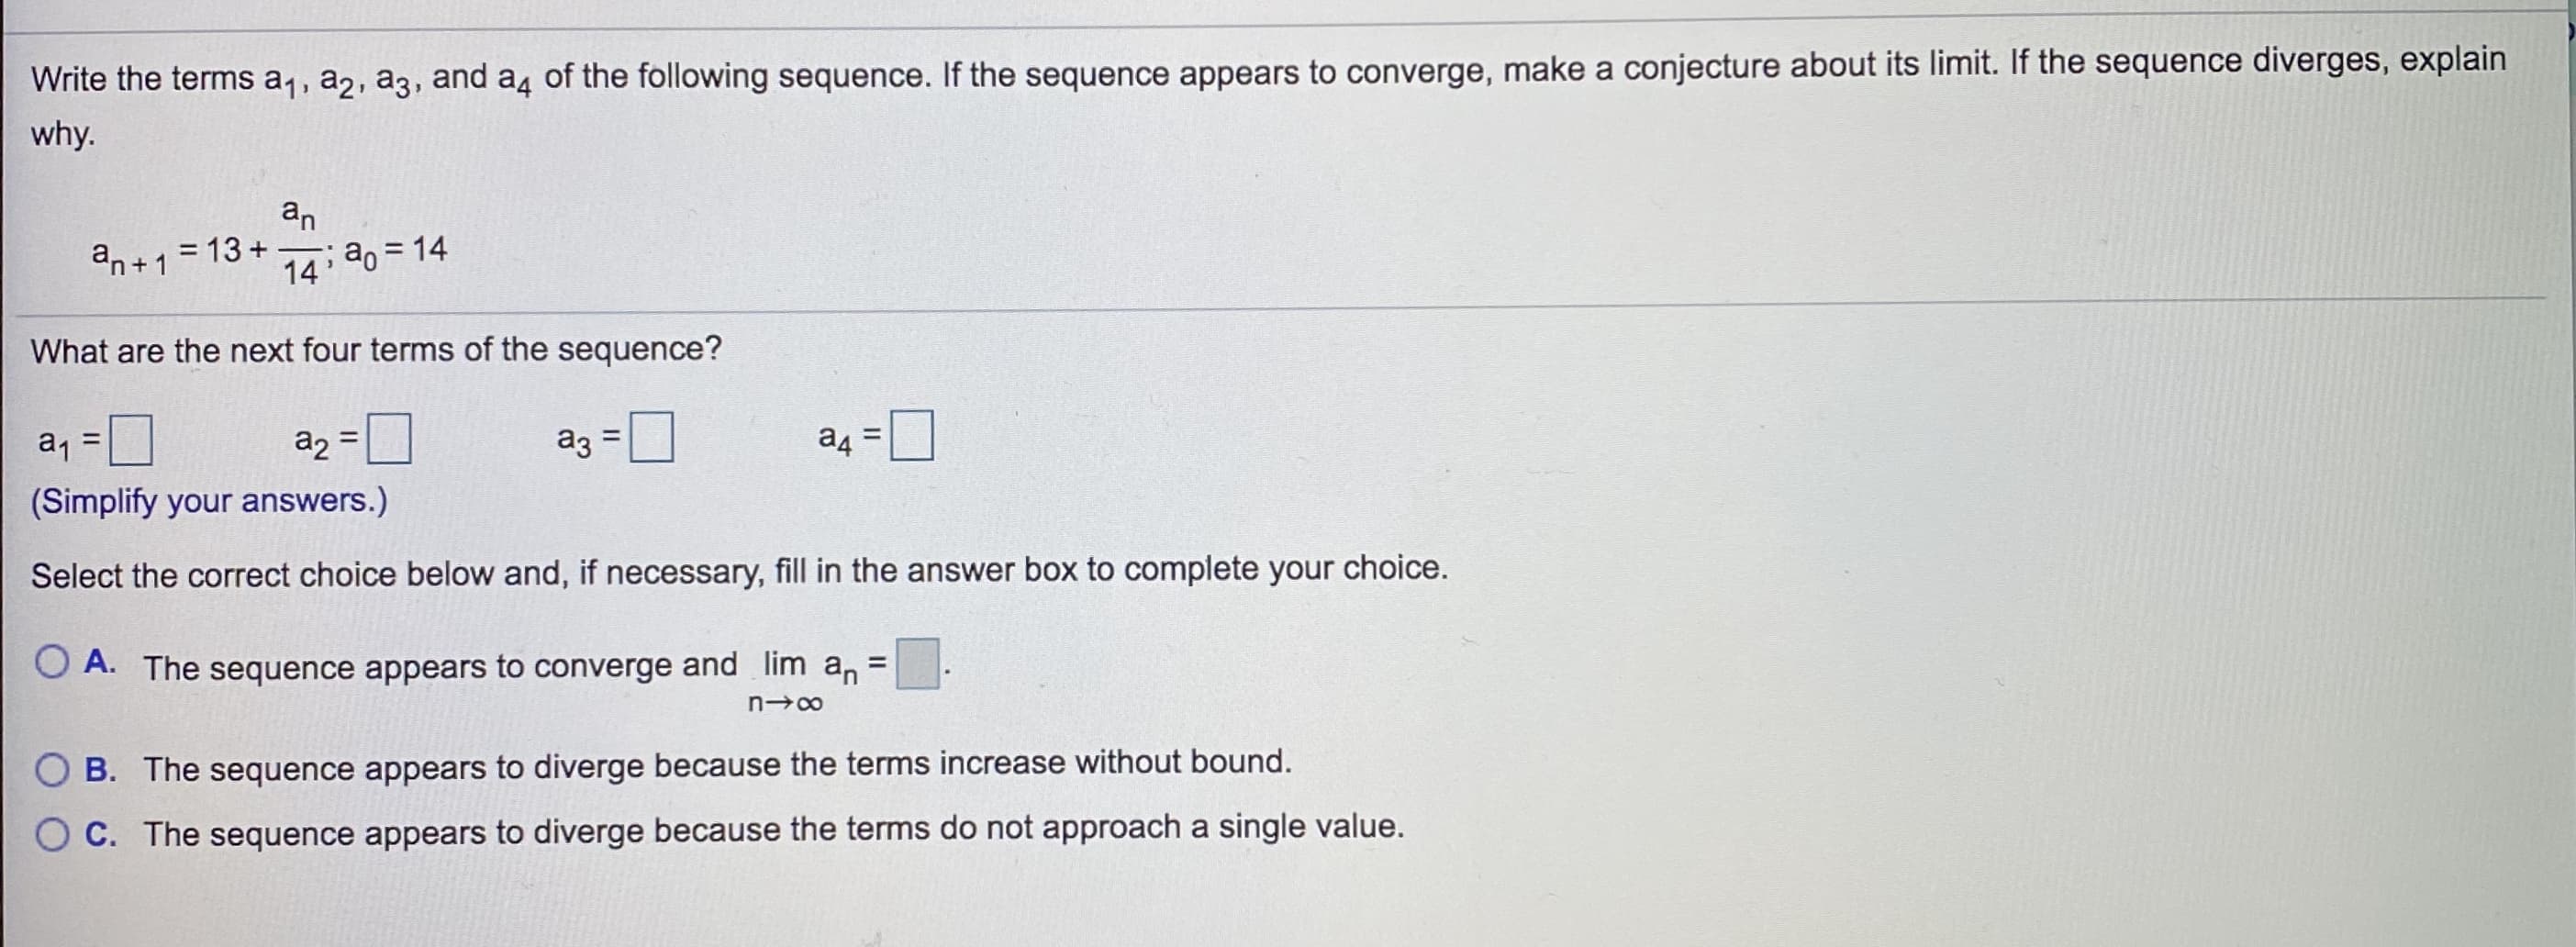 Write the terms a1, a2, a3, and a4 of the following sequence. If the sequence appears to converge, make a conjecture about its limit. If the sequence diverges, explain
why.
an
= 13 +
14 20 = 14
an+1
What are the next four terms of the sequence?
%3D
az
%3D
a1
a2
(Simplify your answers.)
Select the correct choice below and, if necessary, fill in the answer box to complete your choice.
O A. The sequence appears to converge and lim an
%D
